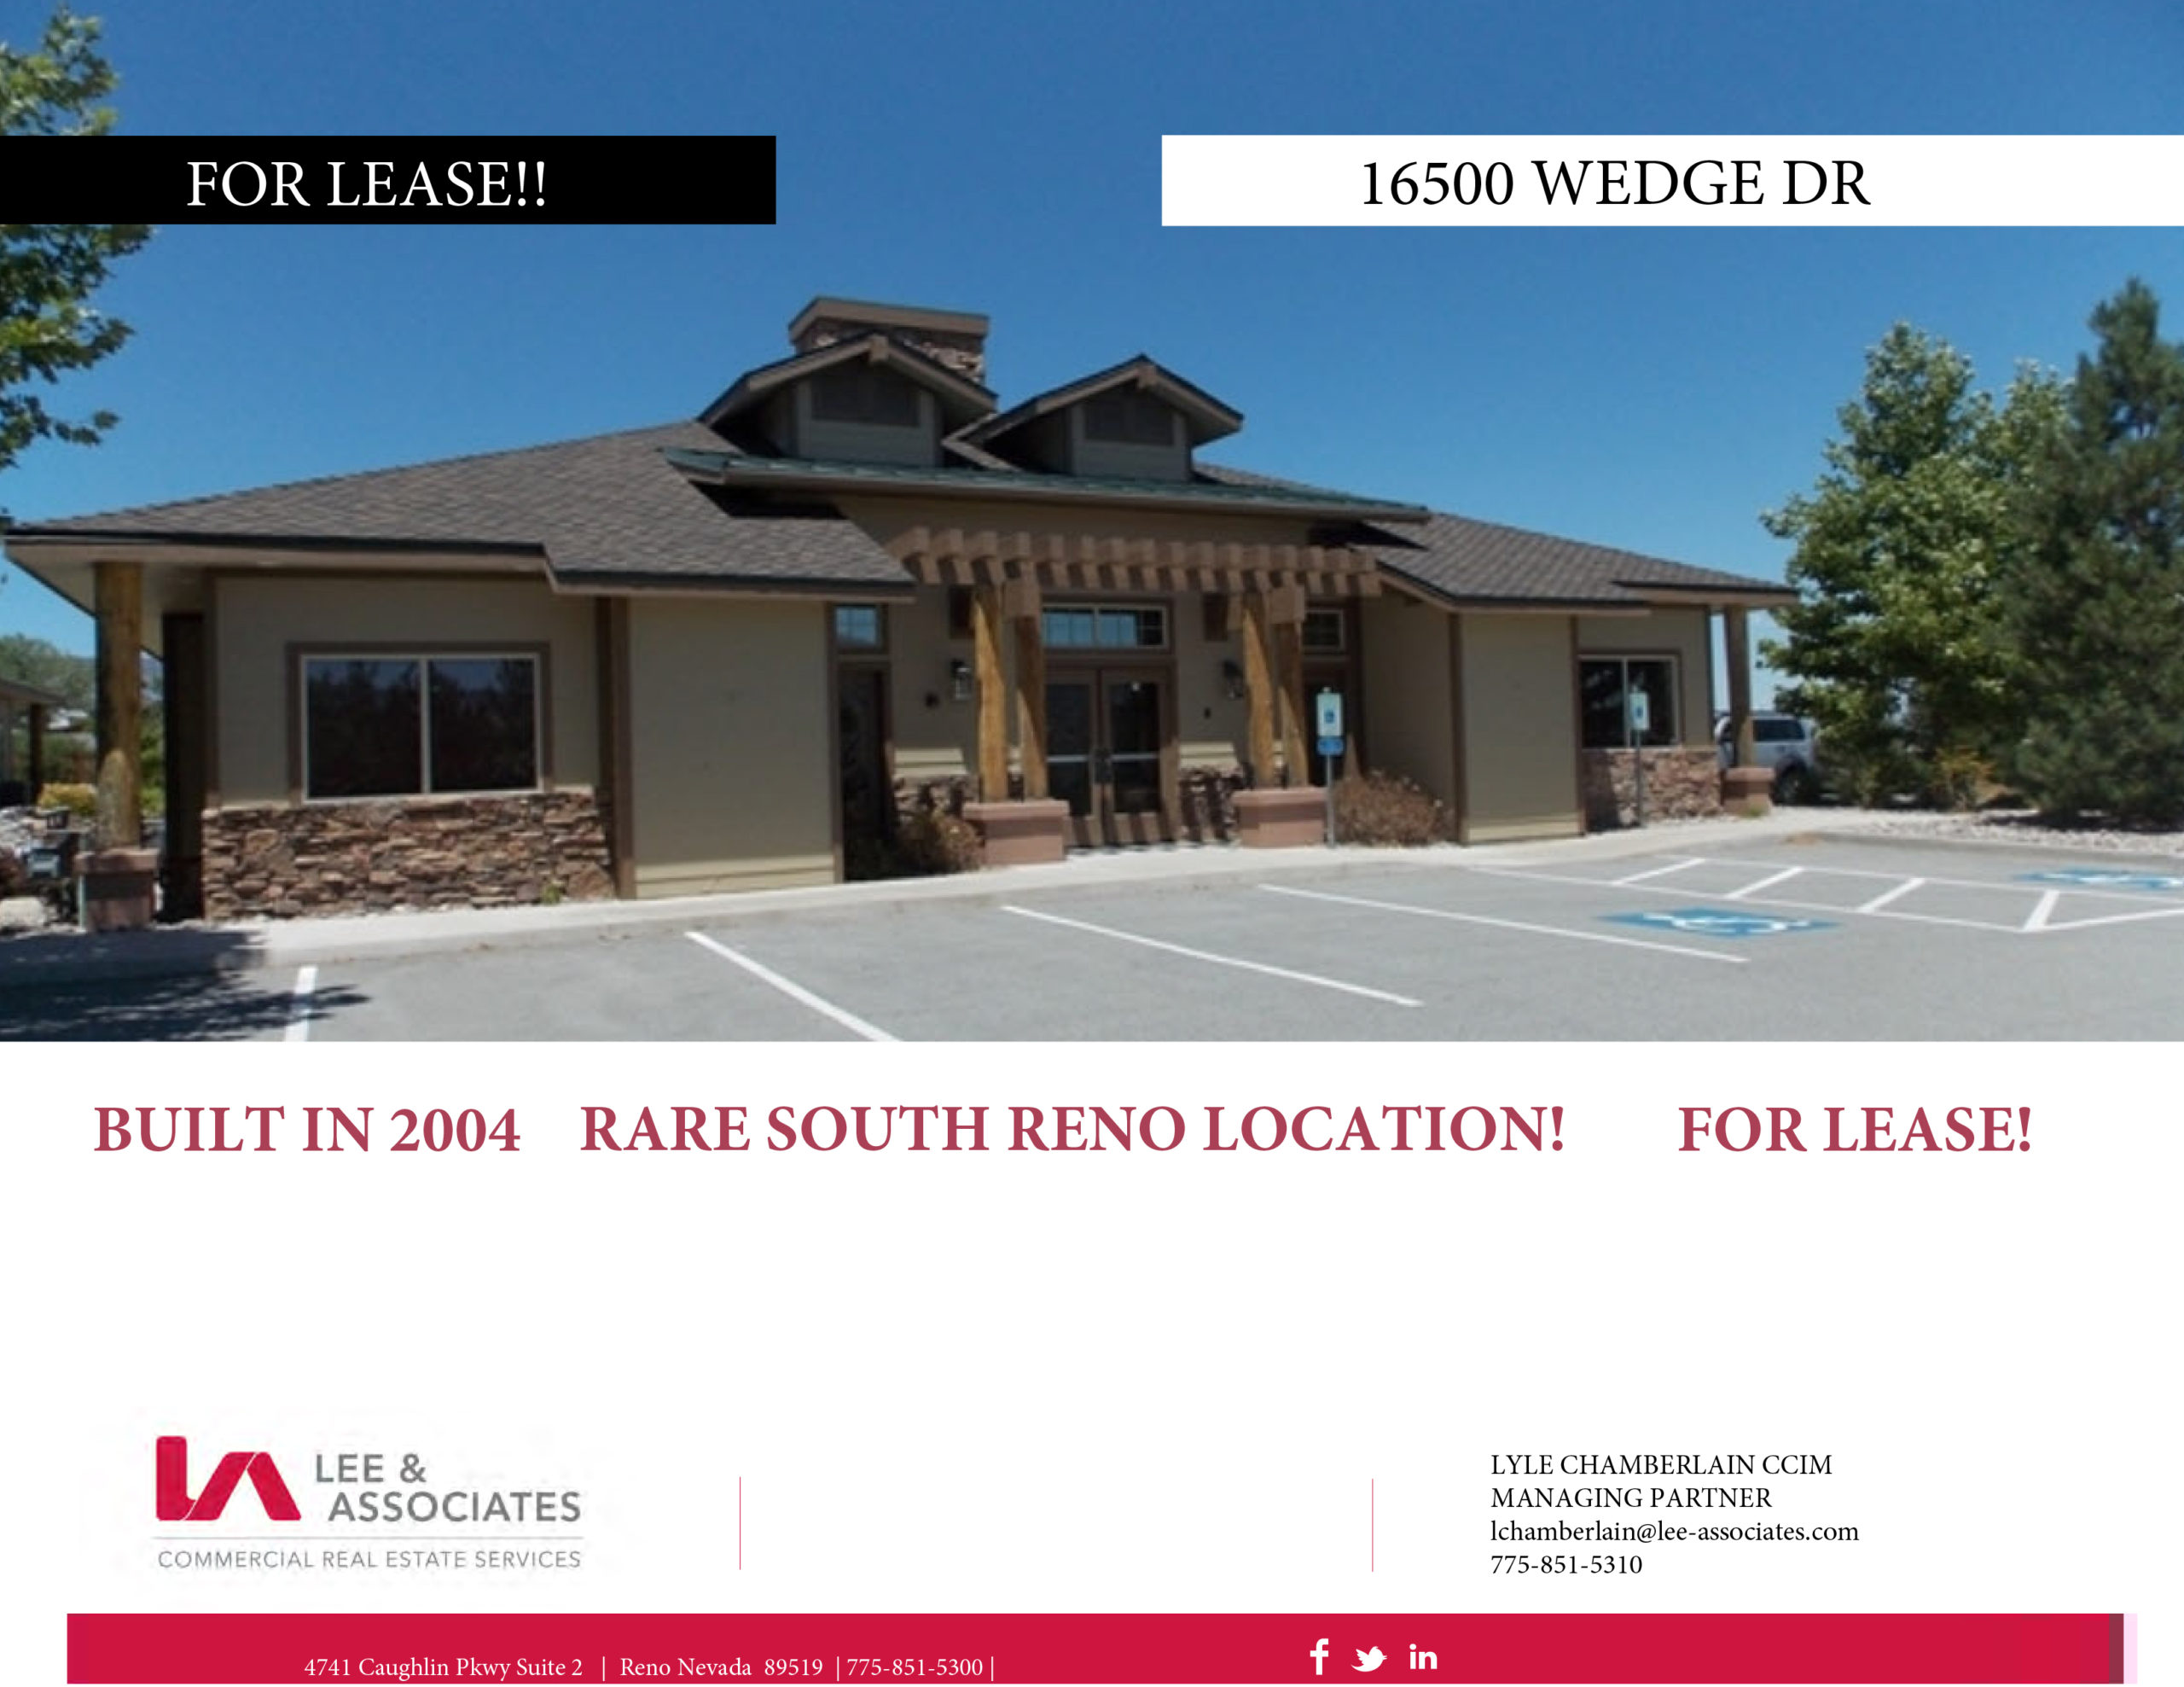 FOR LEASE - 16500 Wedge Drive - Rare South Reno Location